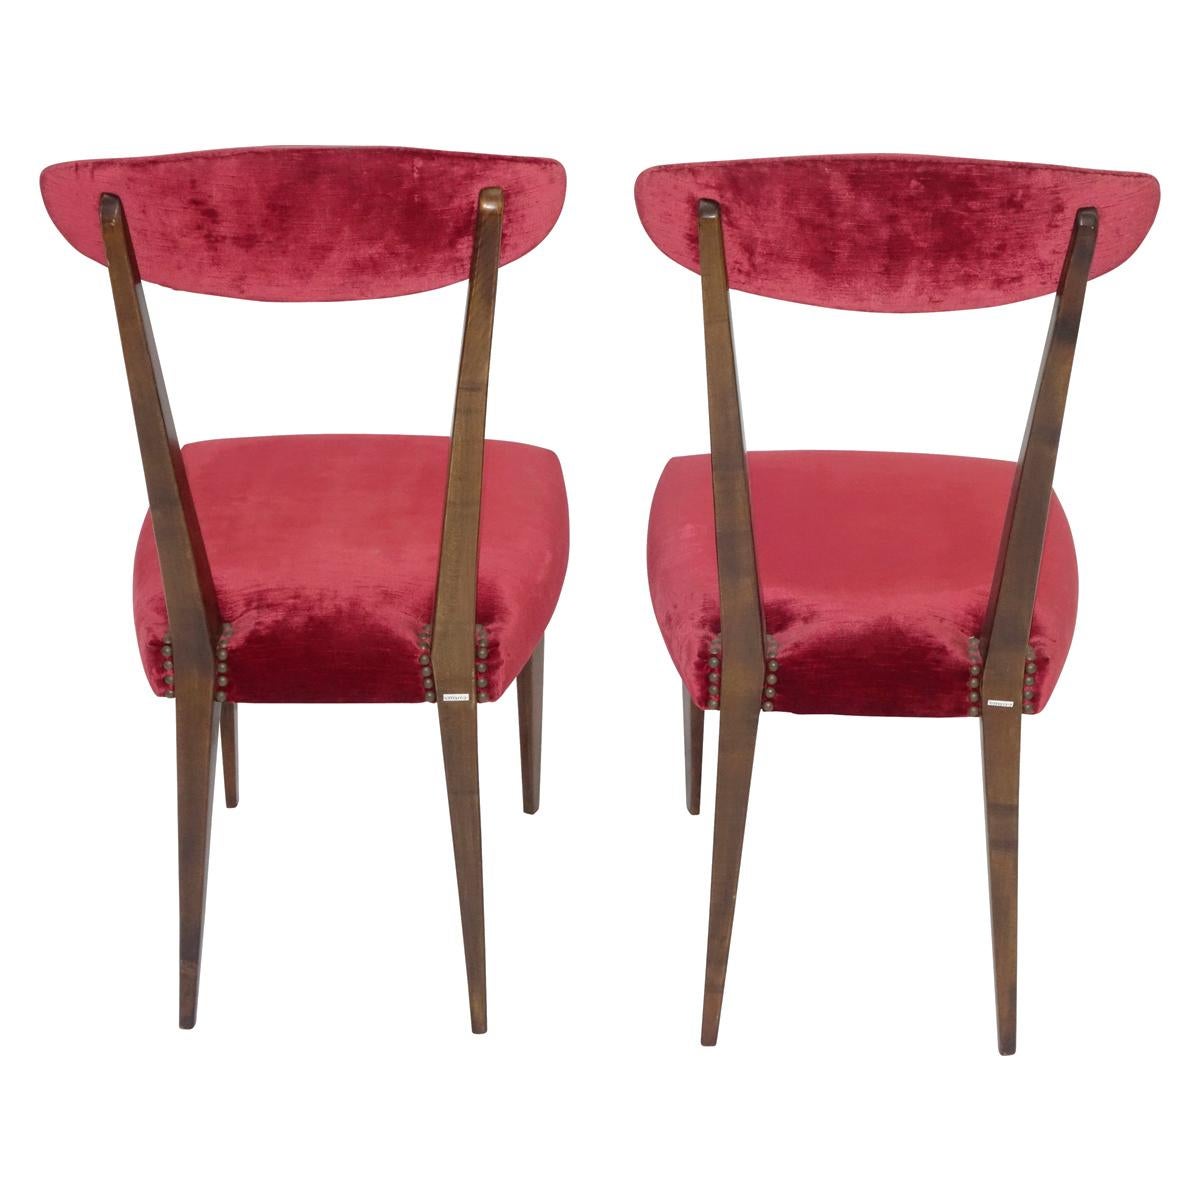 2 elegant side chairs in the manner of Gio Ponti. Wood frame, tapered legs and burgundy velvet backrest and seat. Perfect desk or occasional chairs.